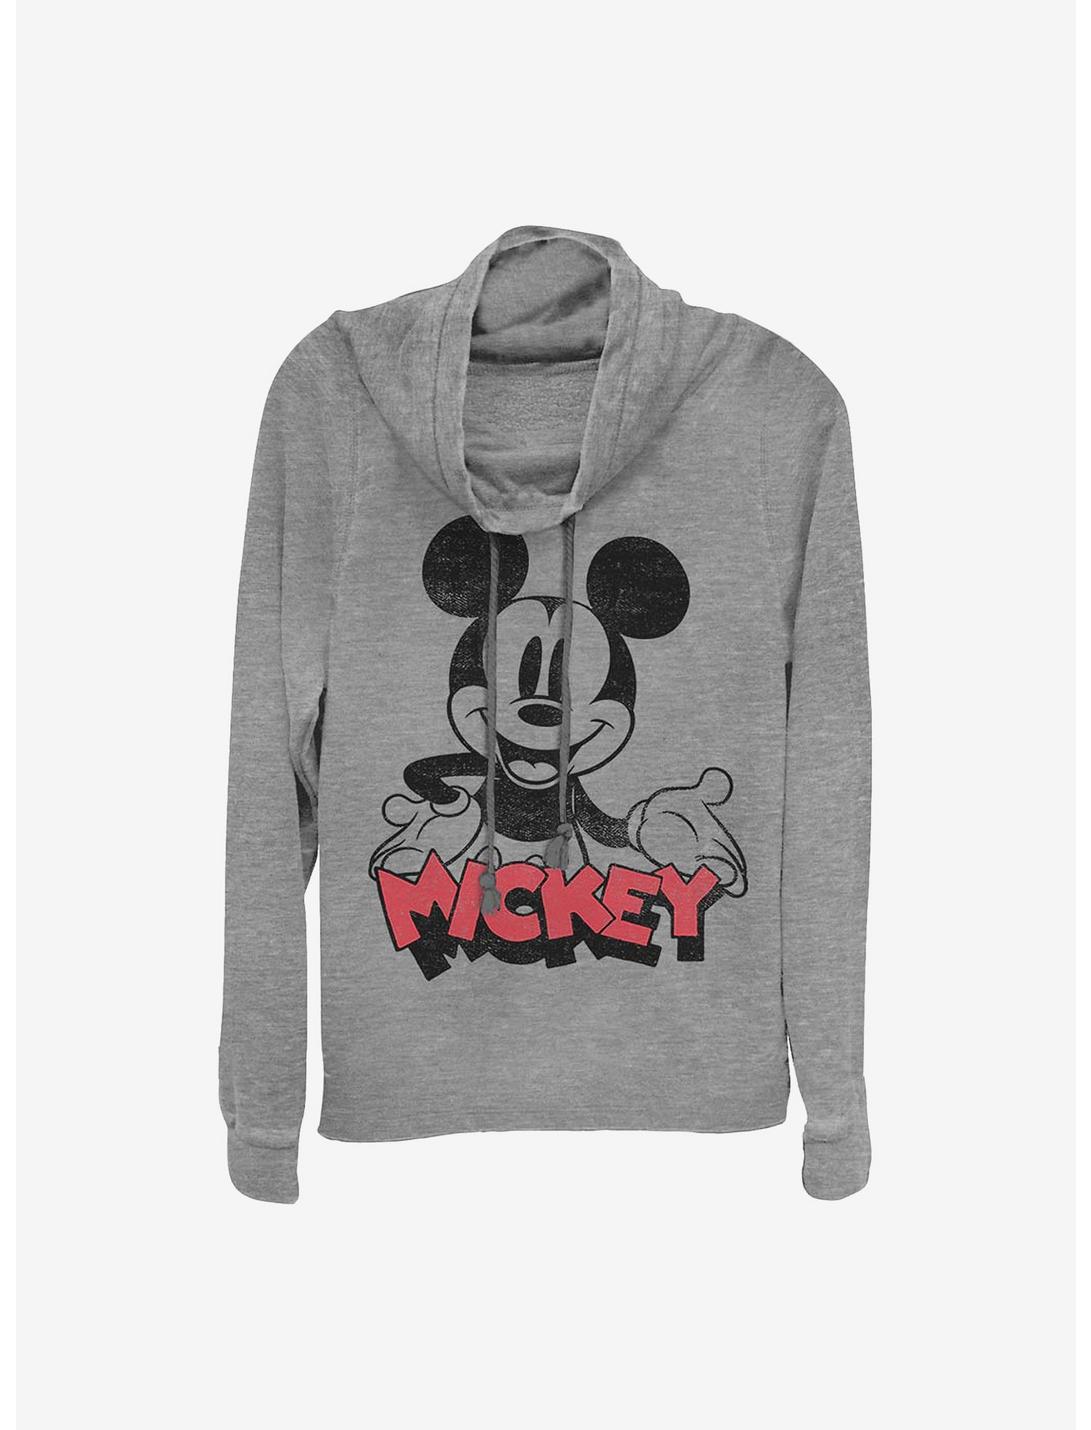 Disney Mickey Mouse Oh Boy Cowlneck Long-Sleeve Girls Top, GRAY HTR, hi-res